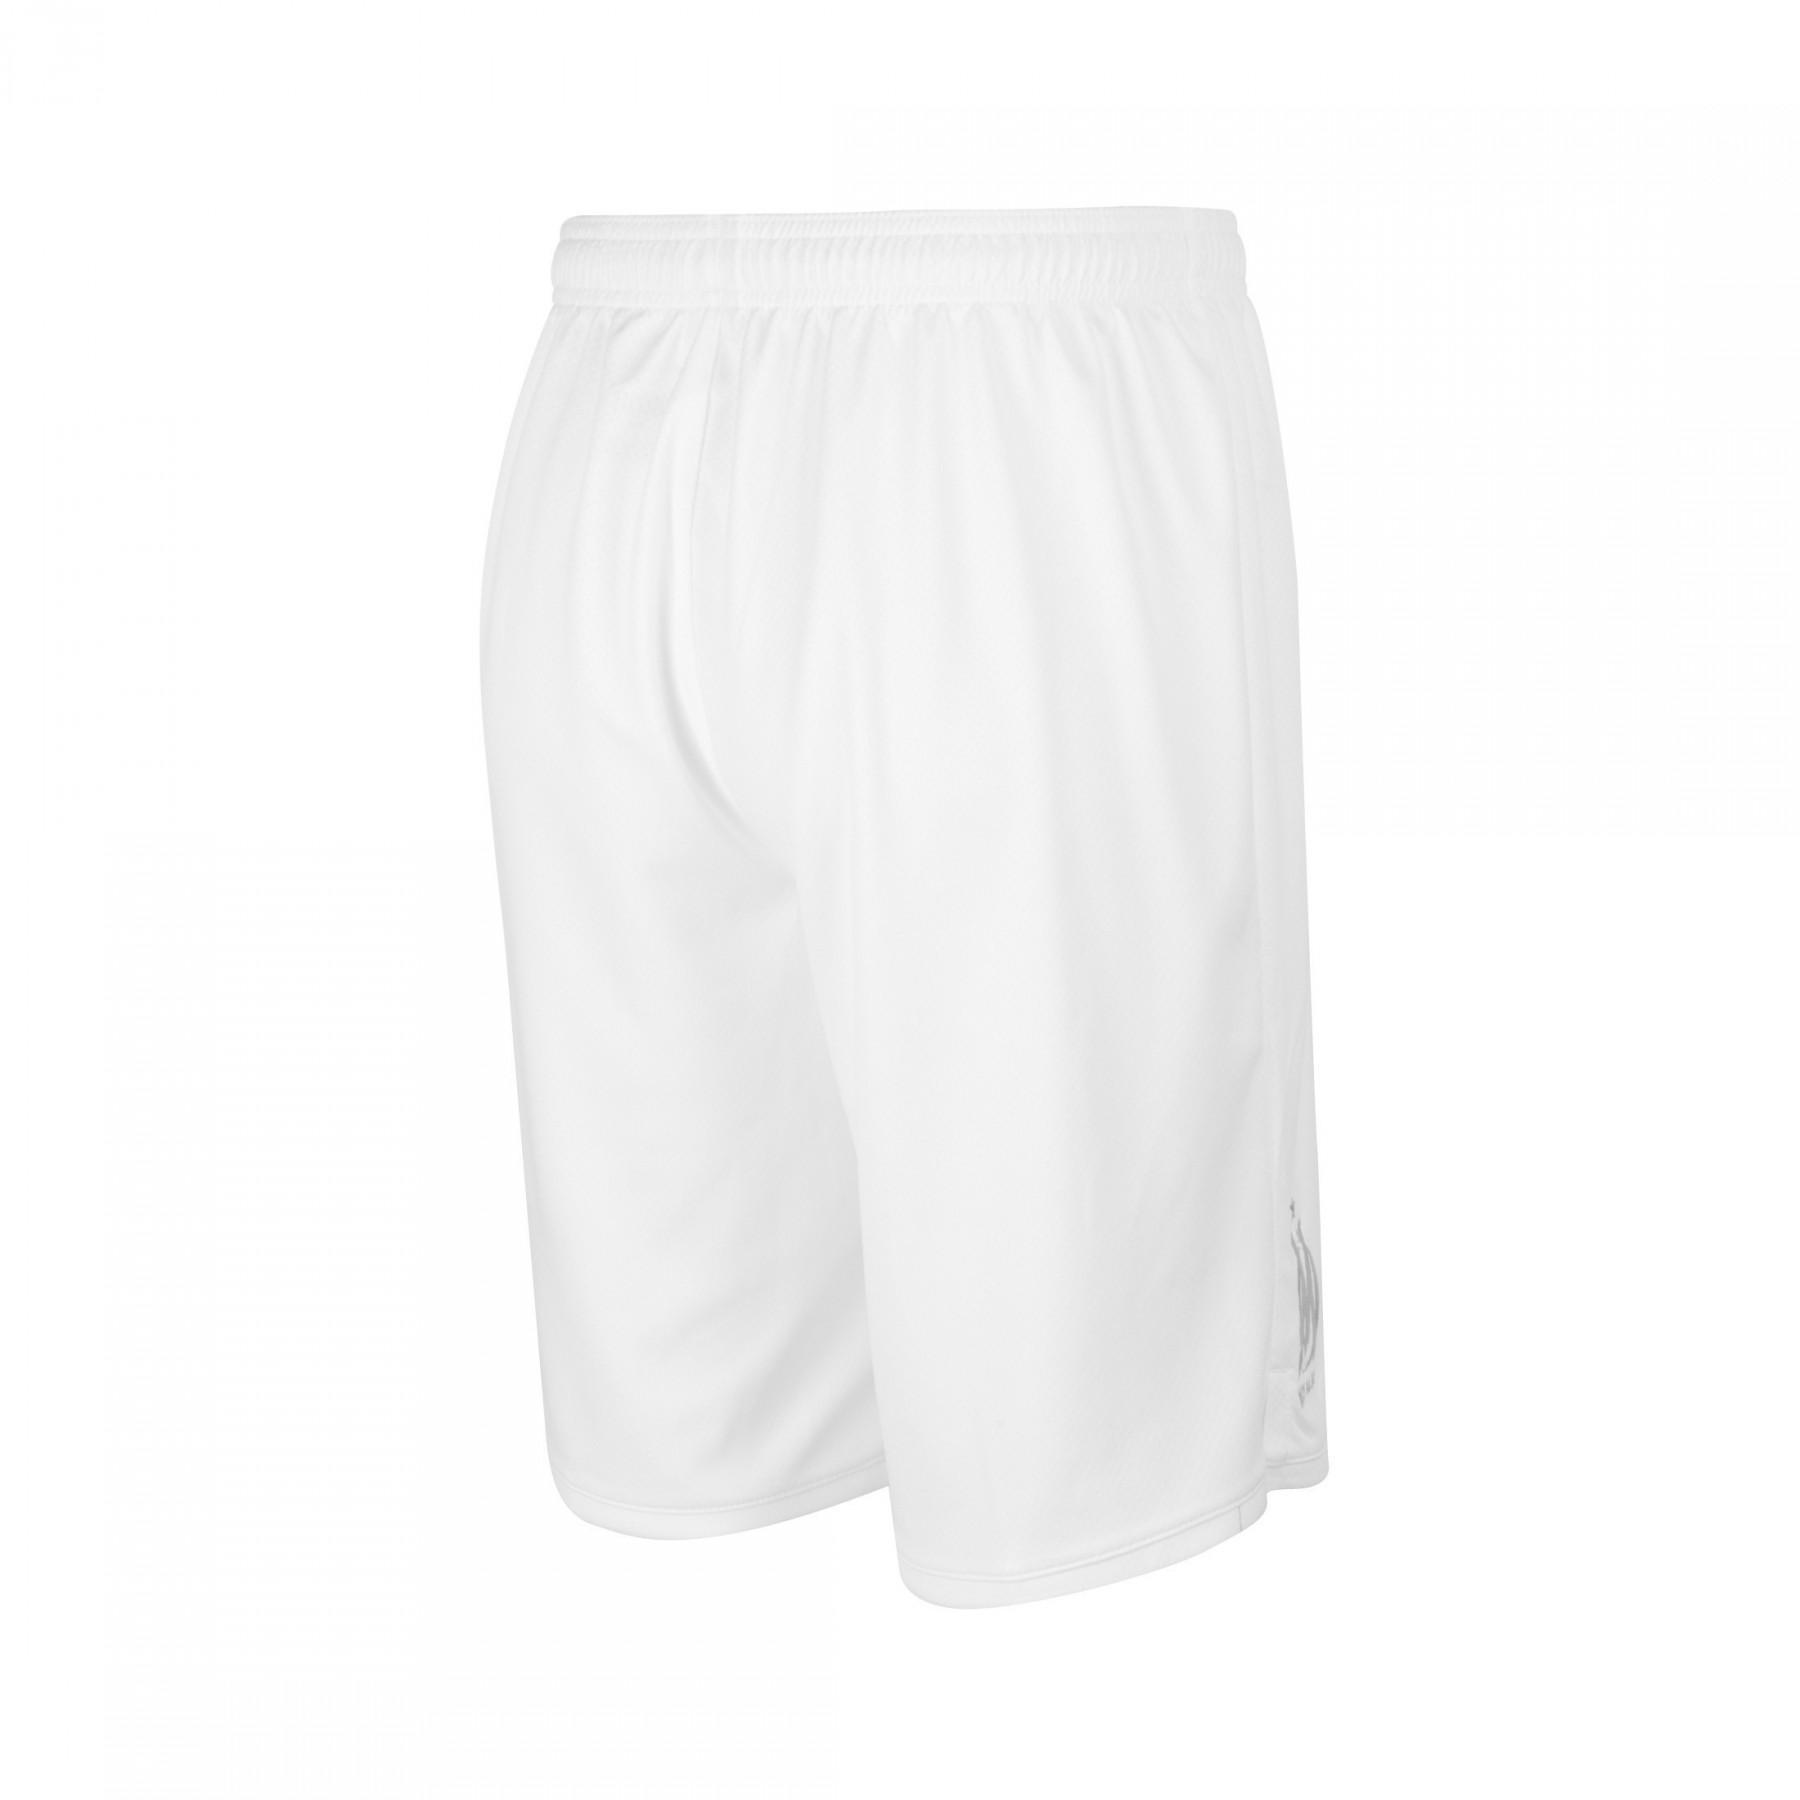 Collector om shorts 2019/2020